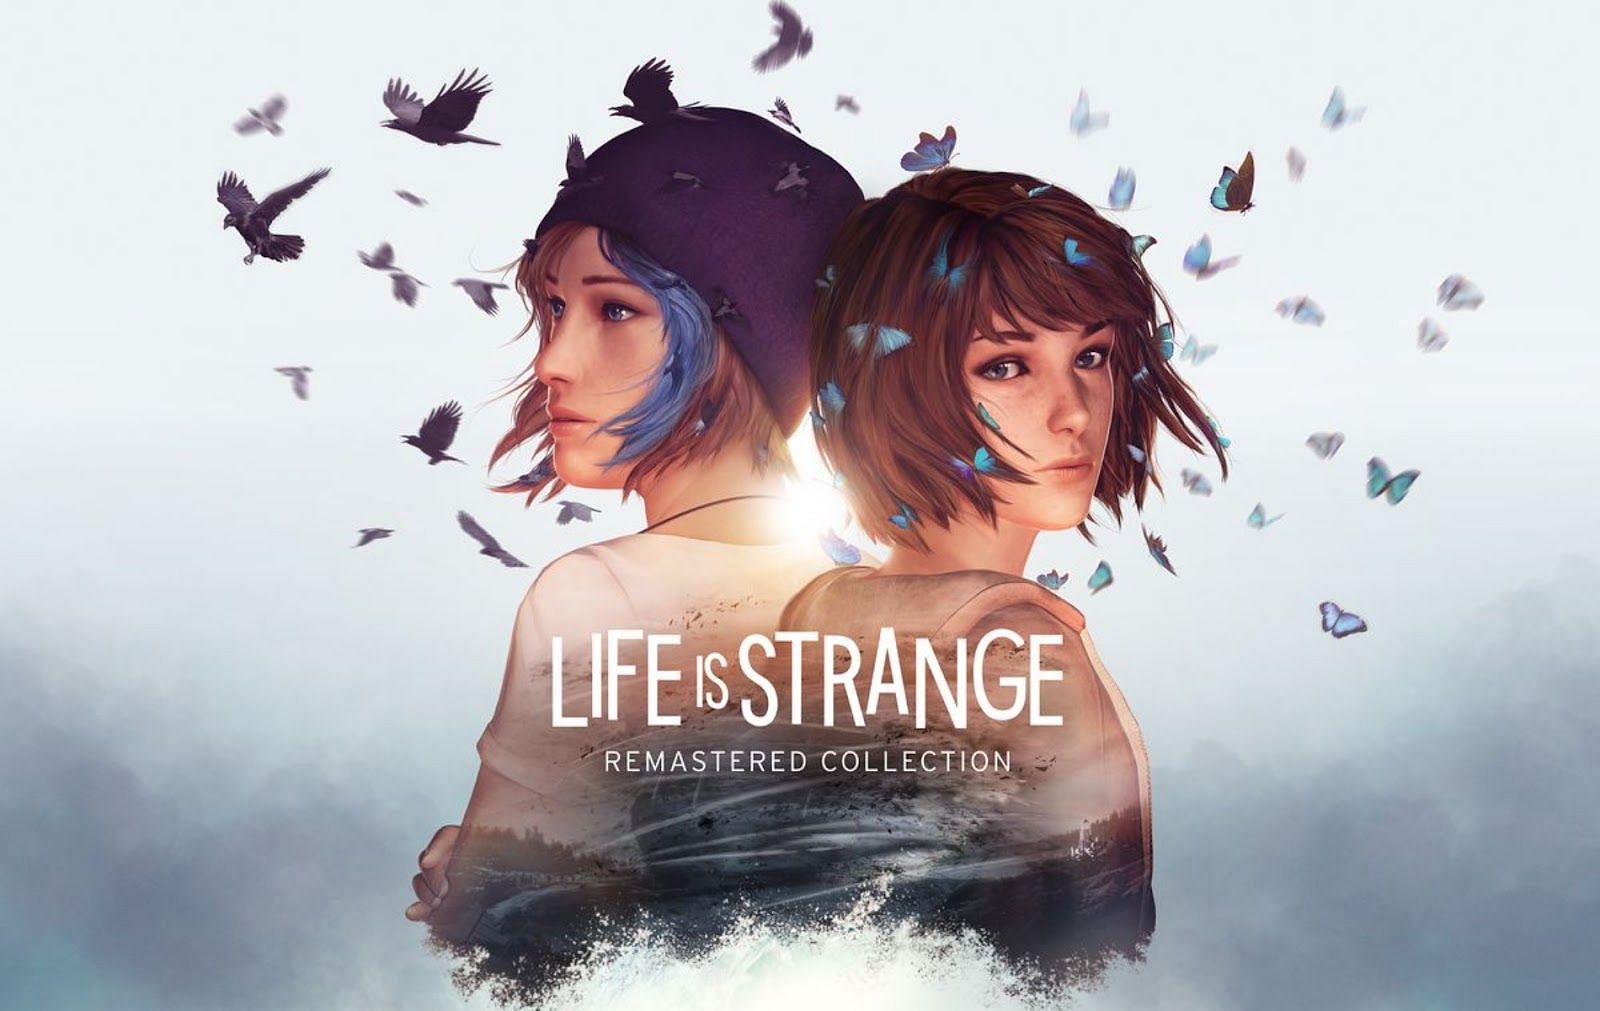 Life is Strange Remastered Collection is out now on all platforms (Image by Square Enix)